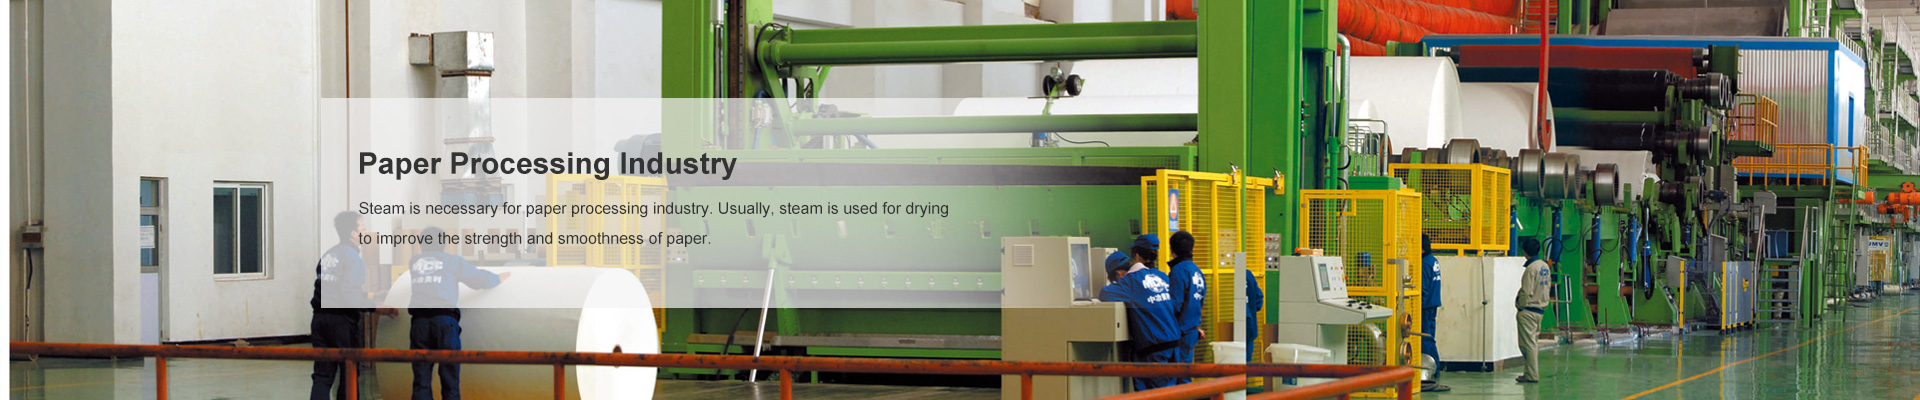 Paper Processing Industry